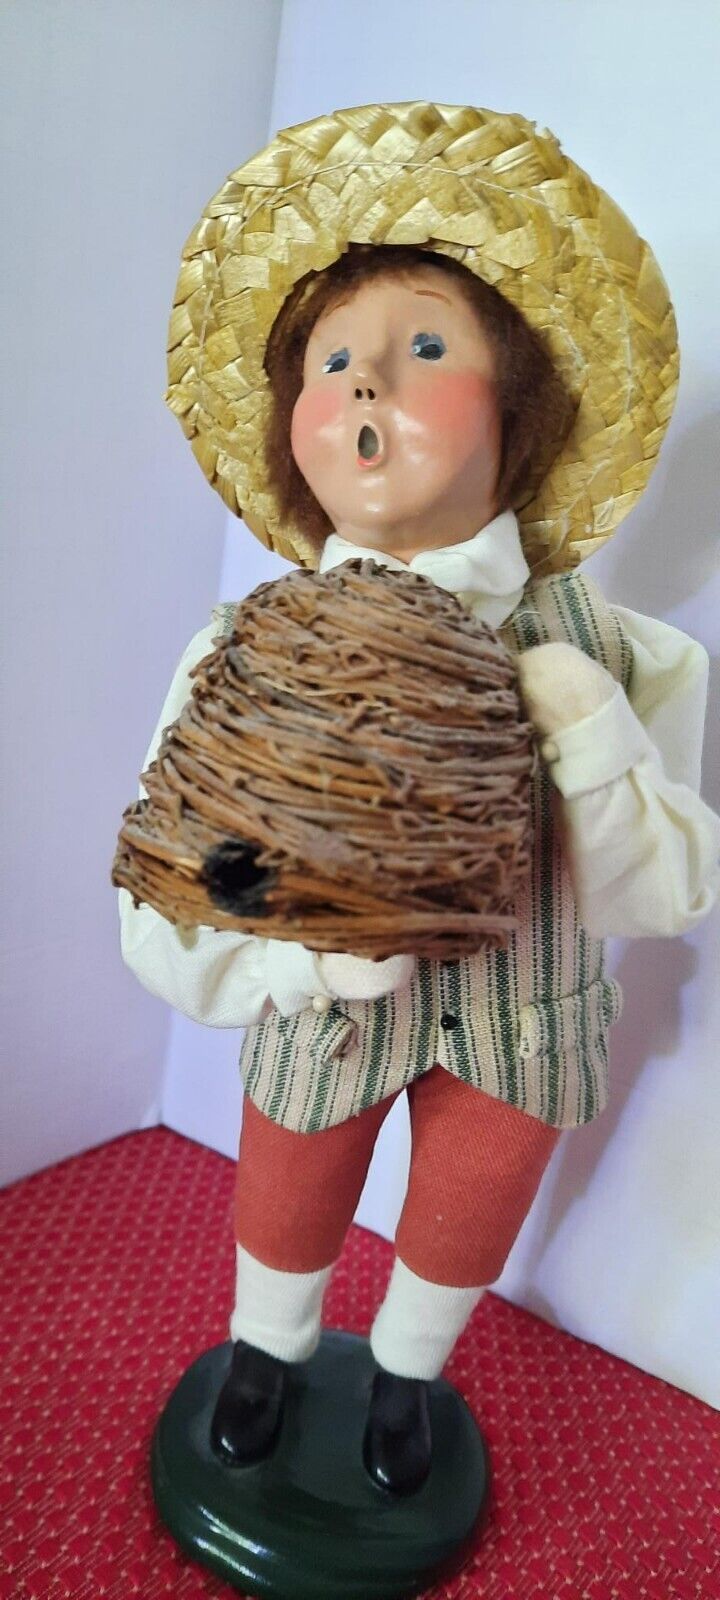 Byers Choice Colonial Williamsburg Boy with Beehive - 2002